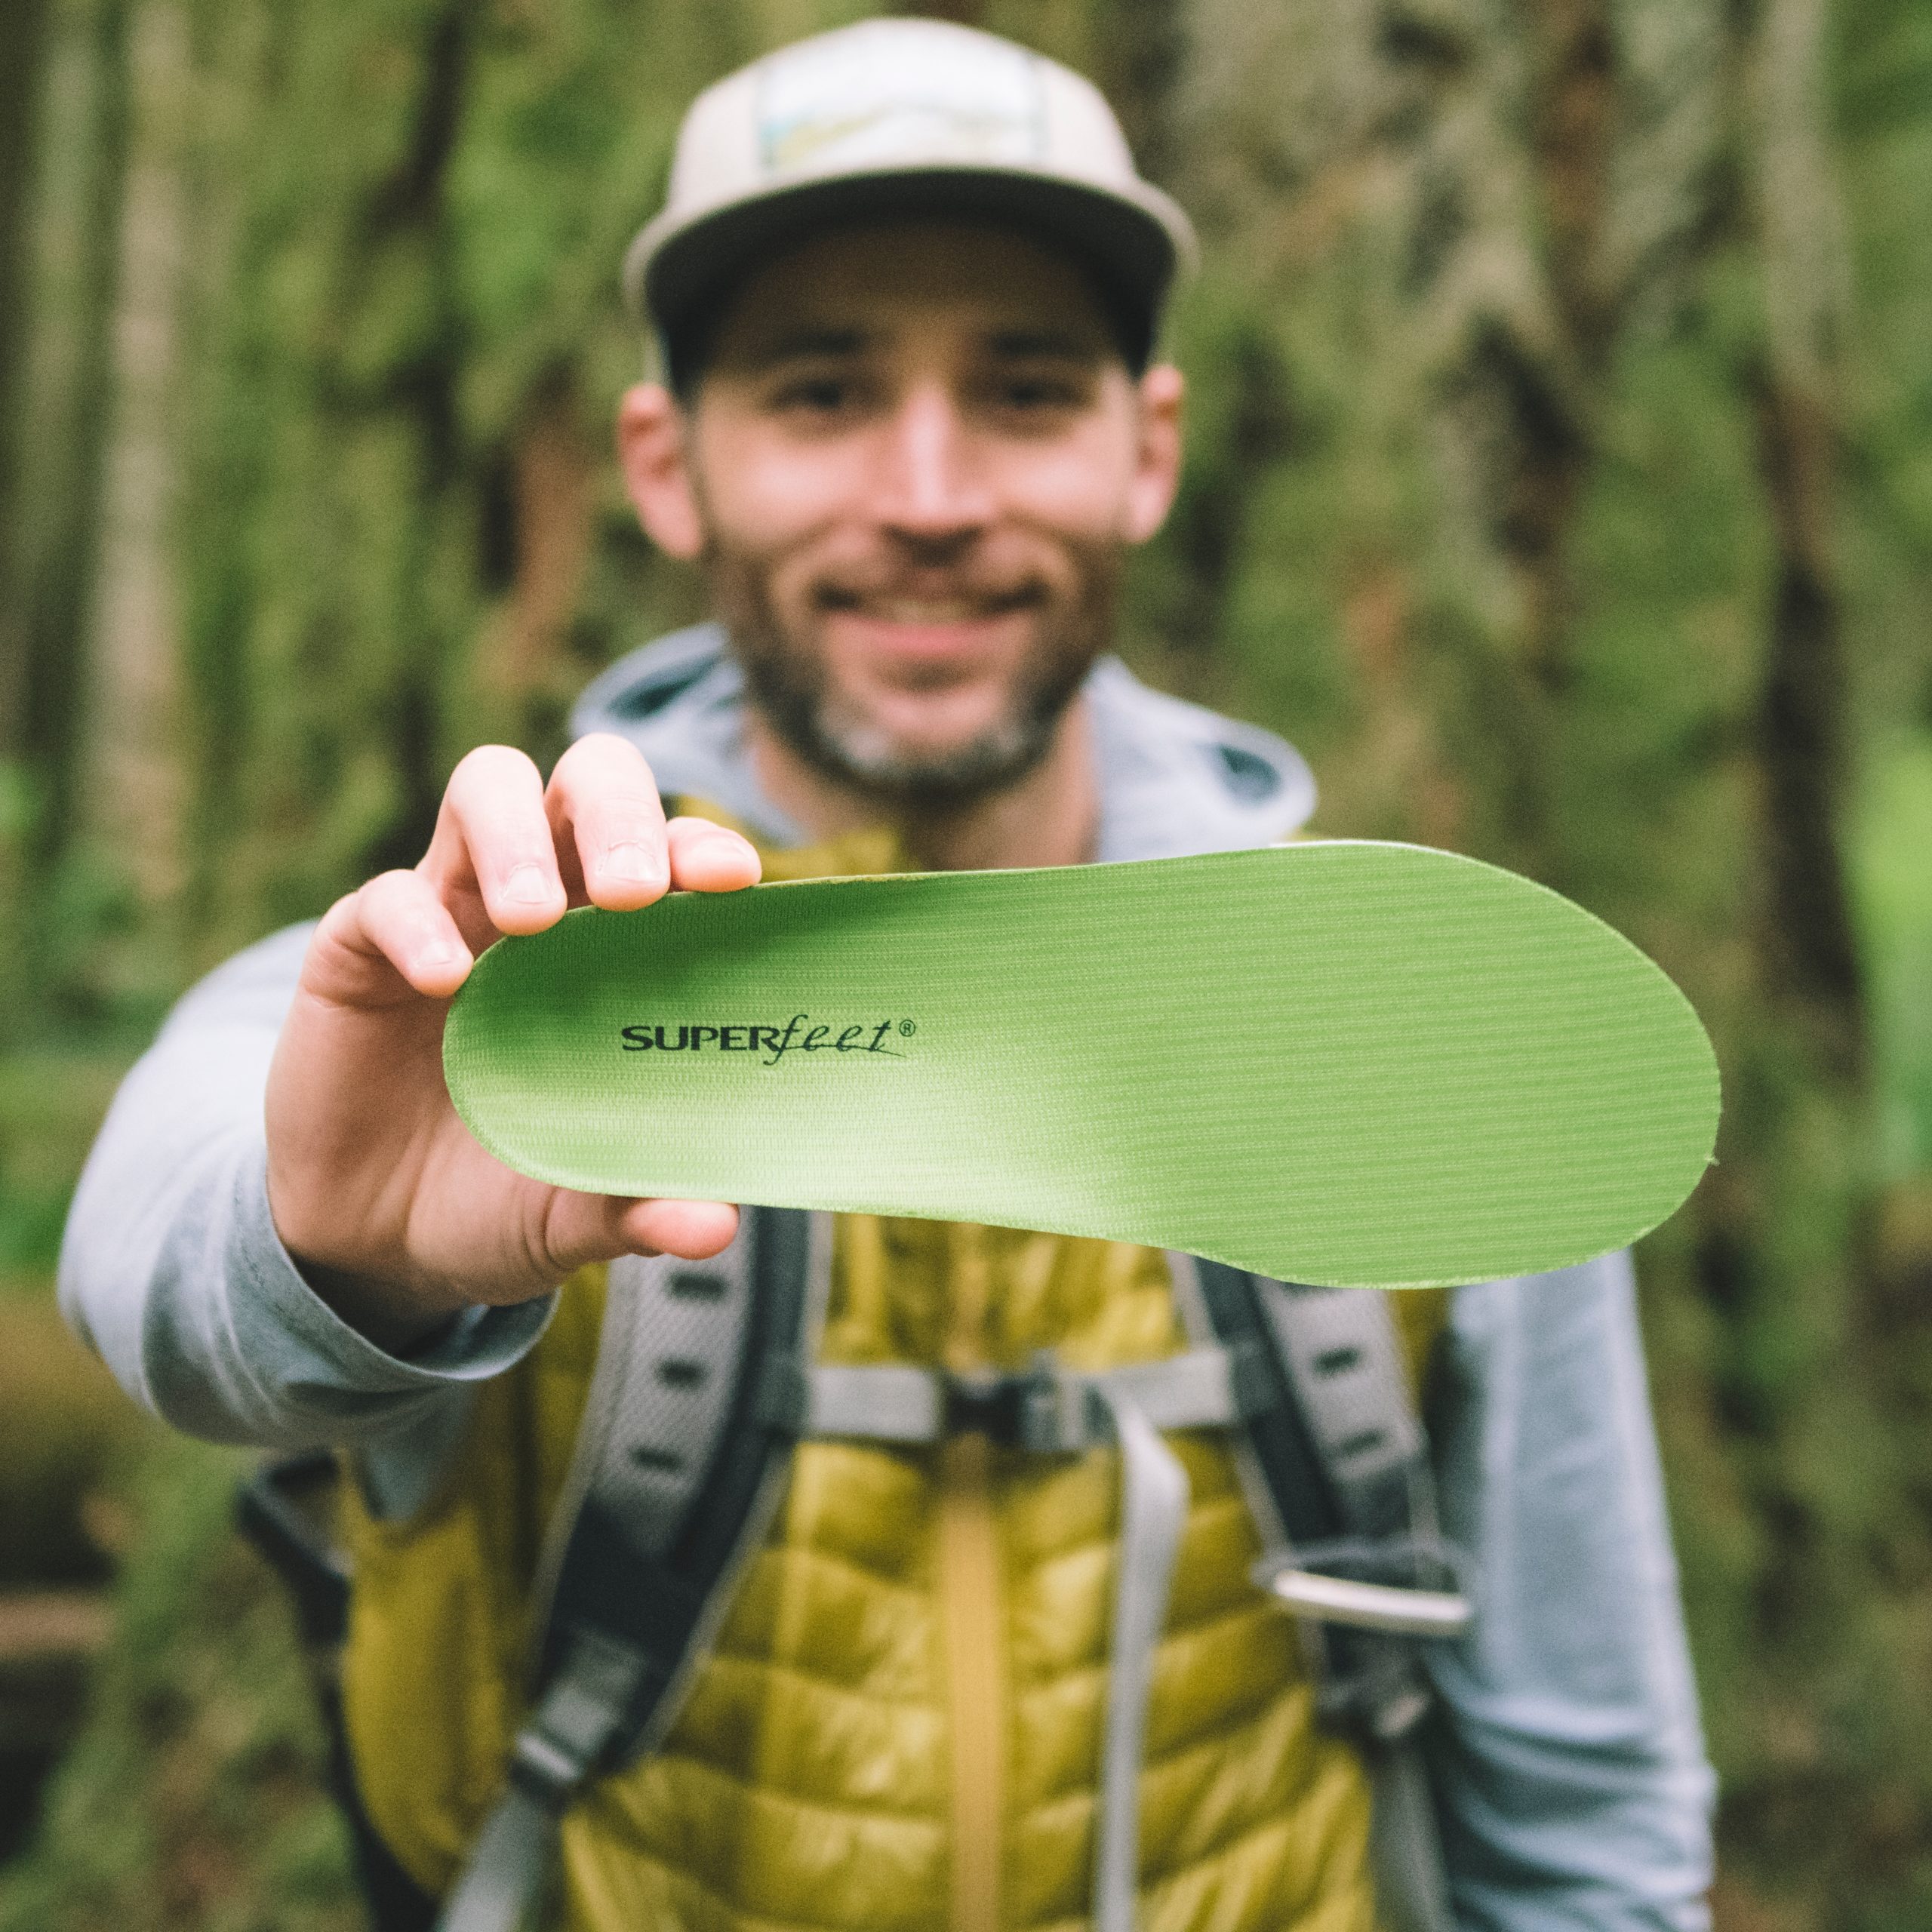 Professional-Grade Orthotic Support with the Superfeet Green inserts